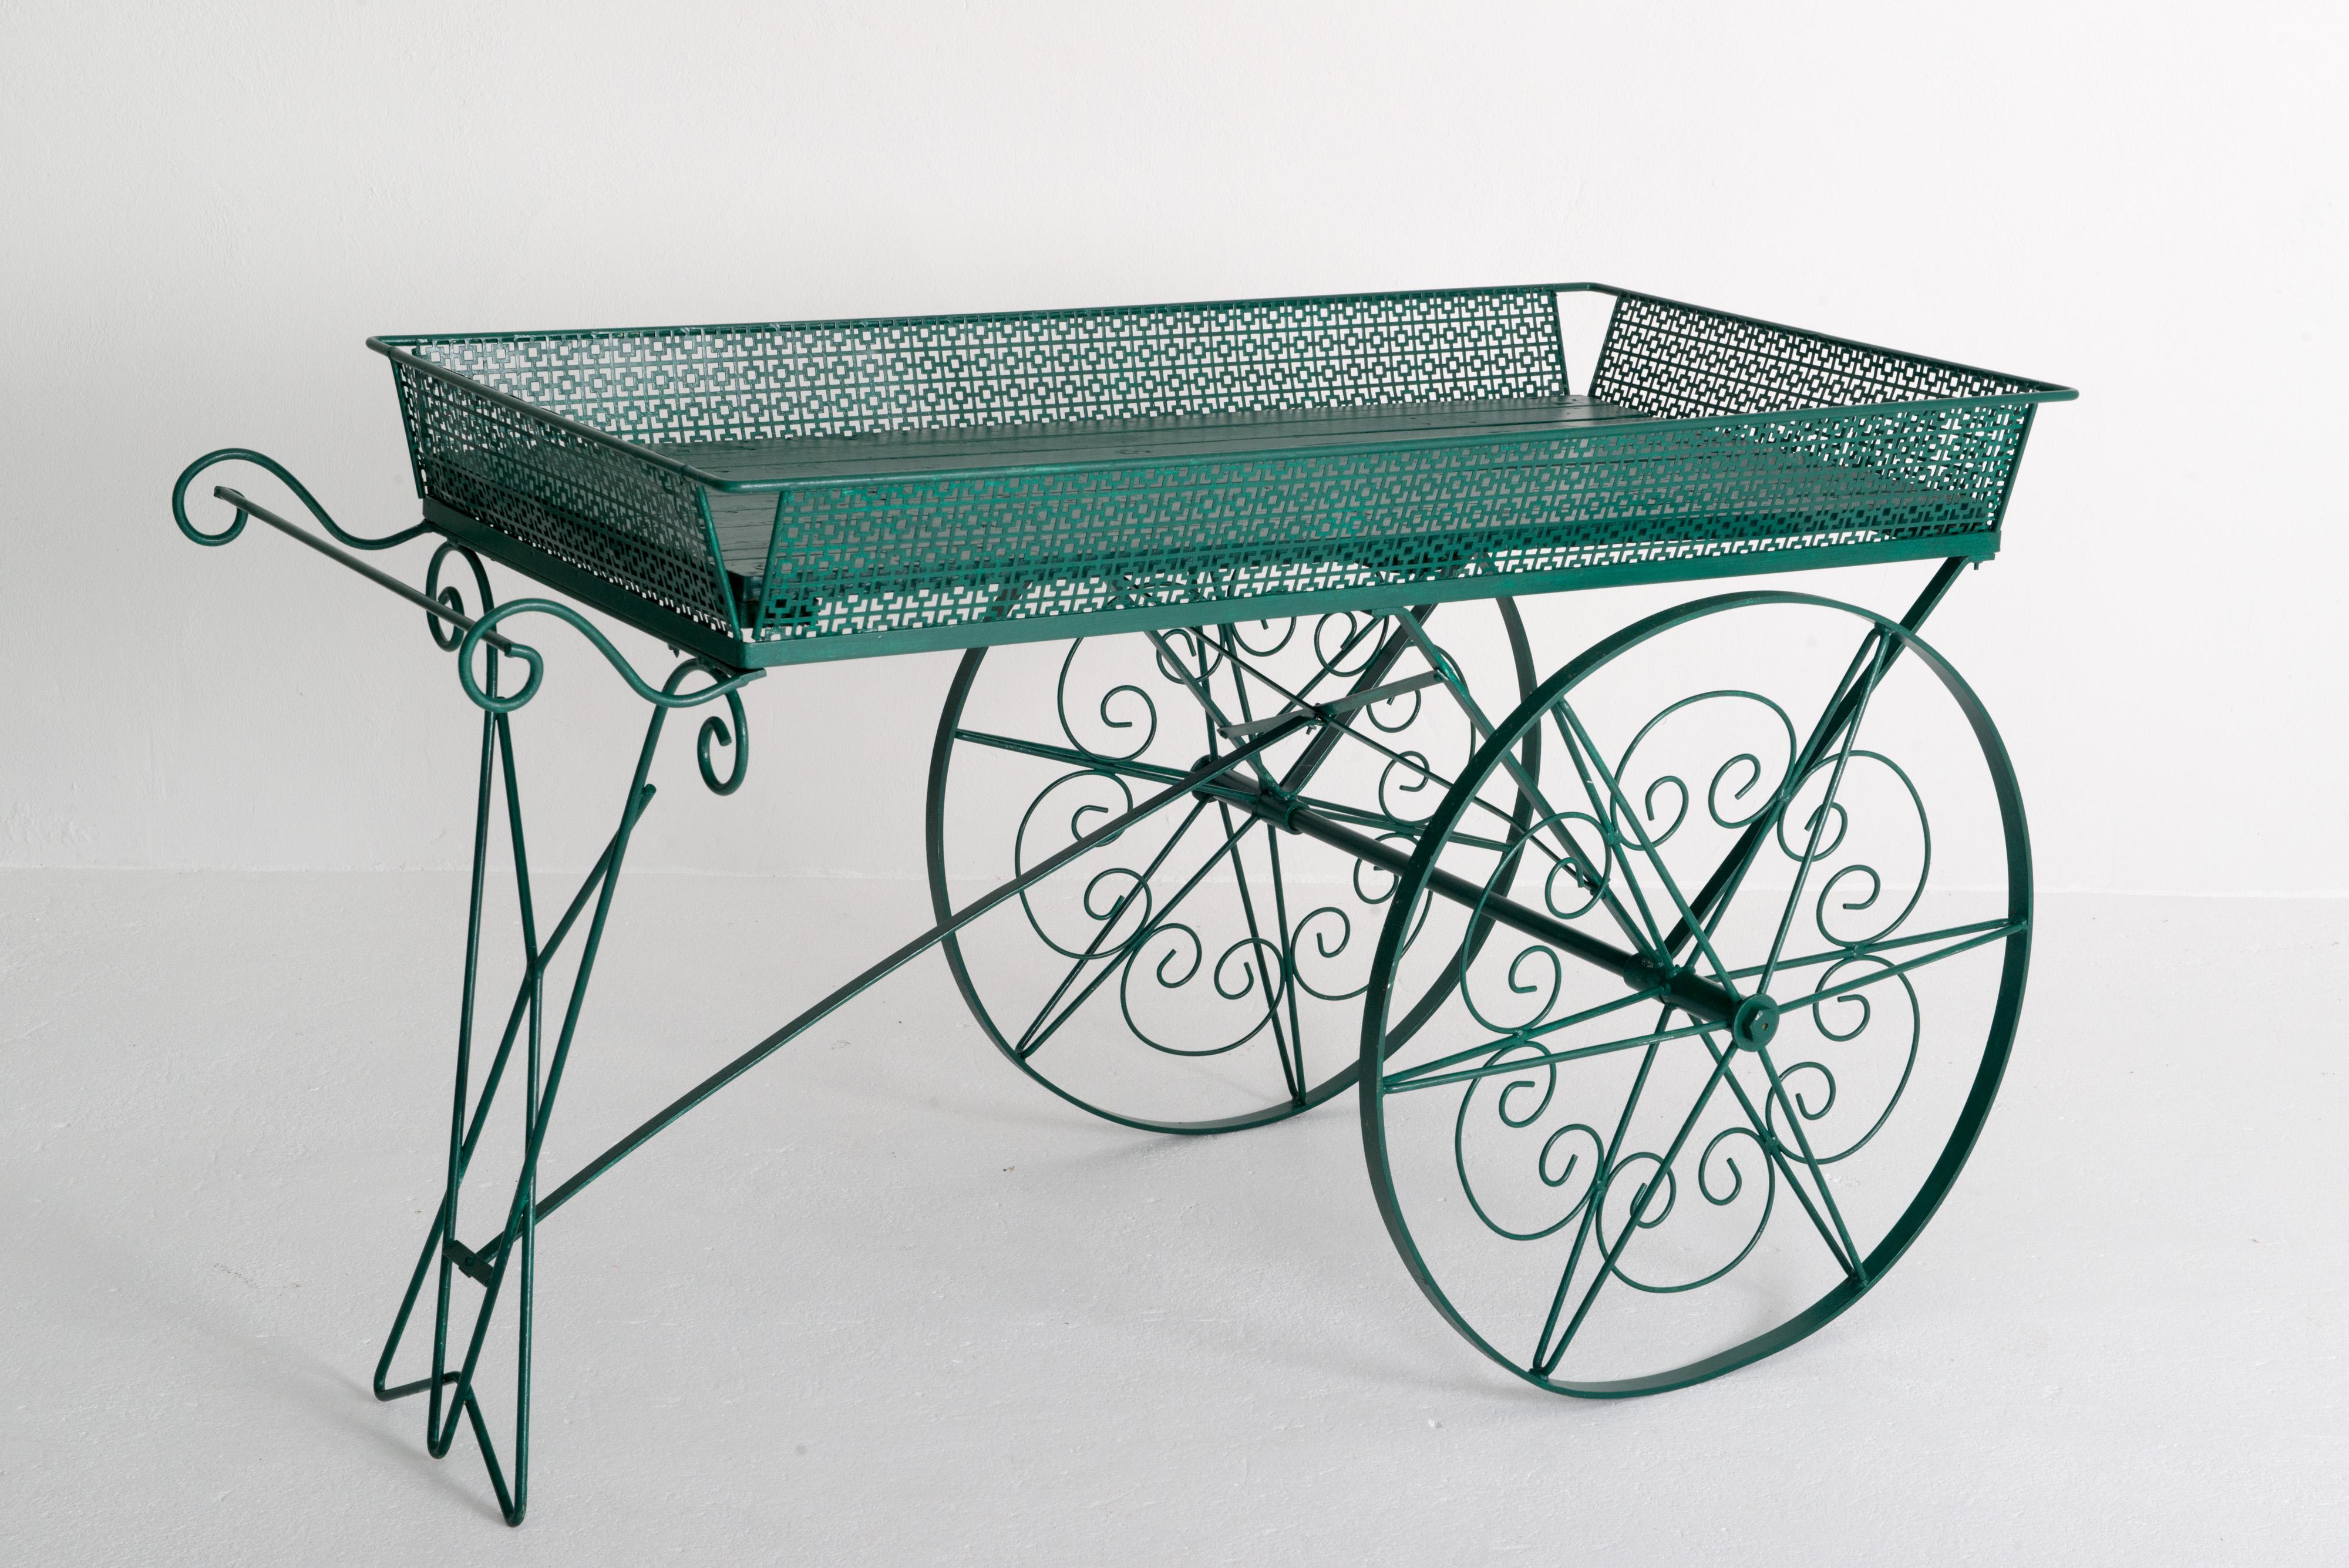 Large green painted wood and metal garden flower cart, with large decorative and functioning metal wheels. This cart is both useful and decorative. It would be great for the garden or as a fixture in a shop. Use your imagination.